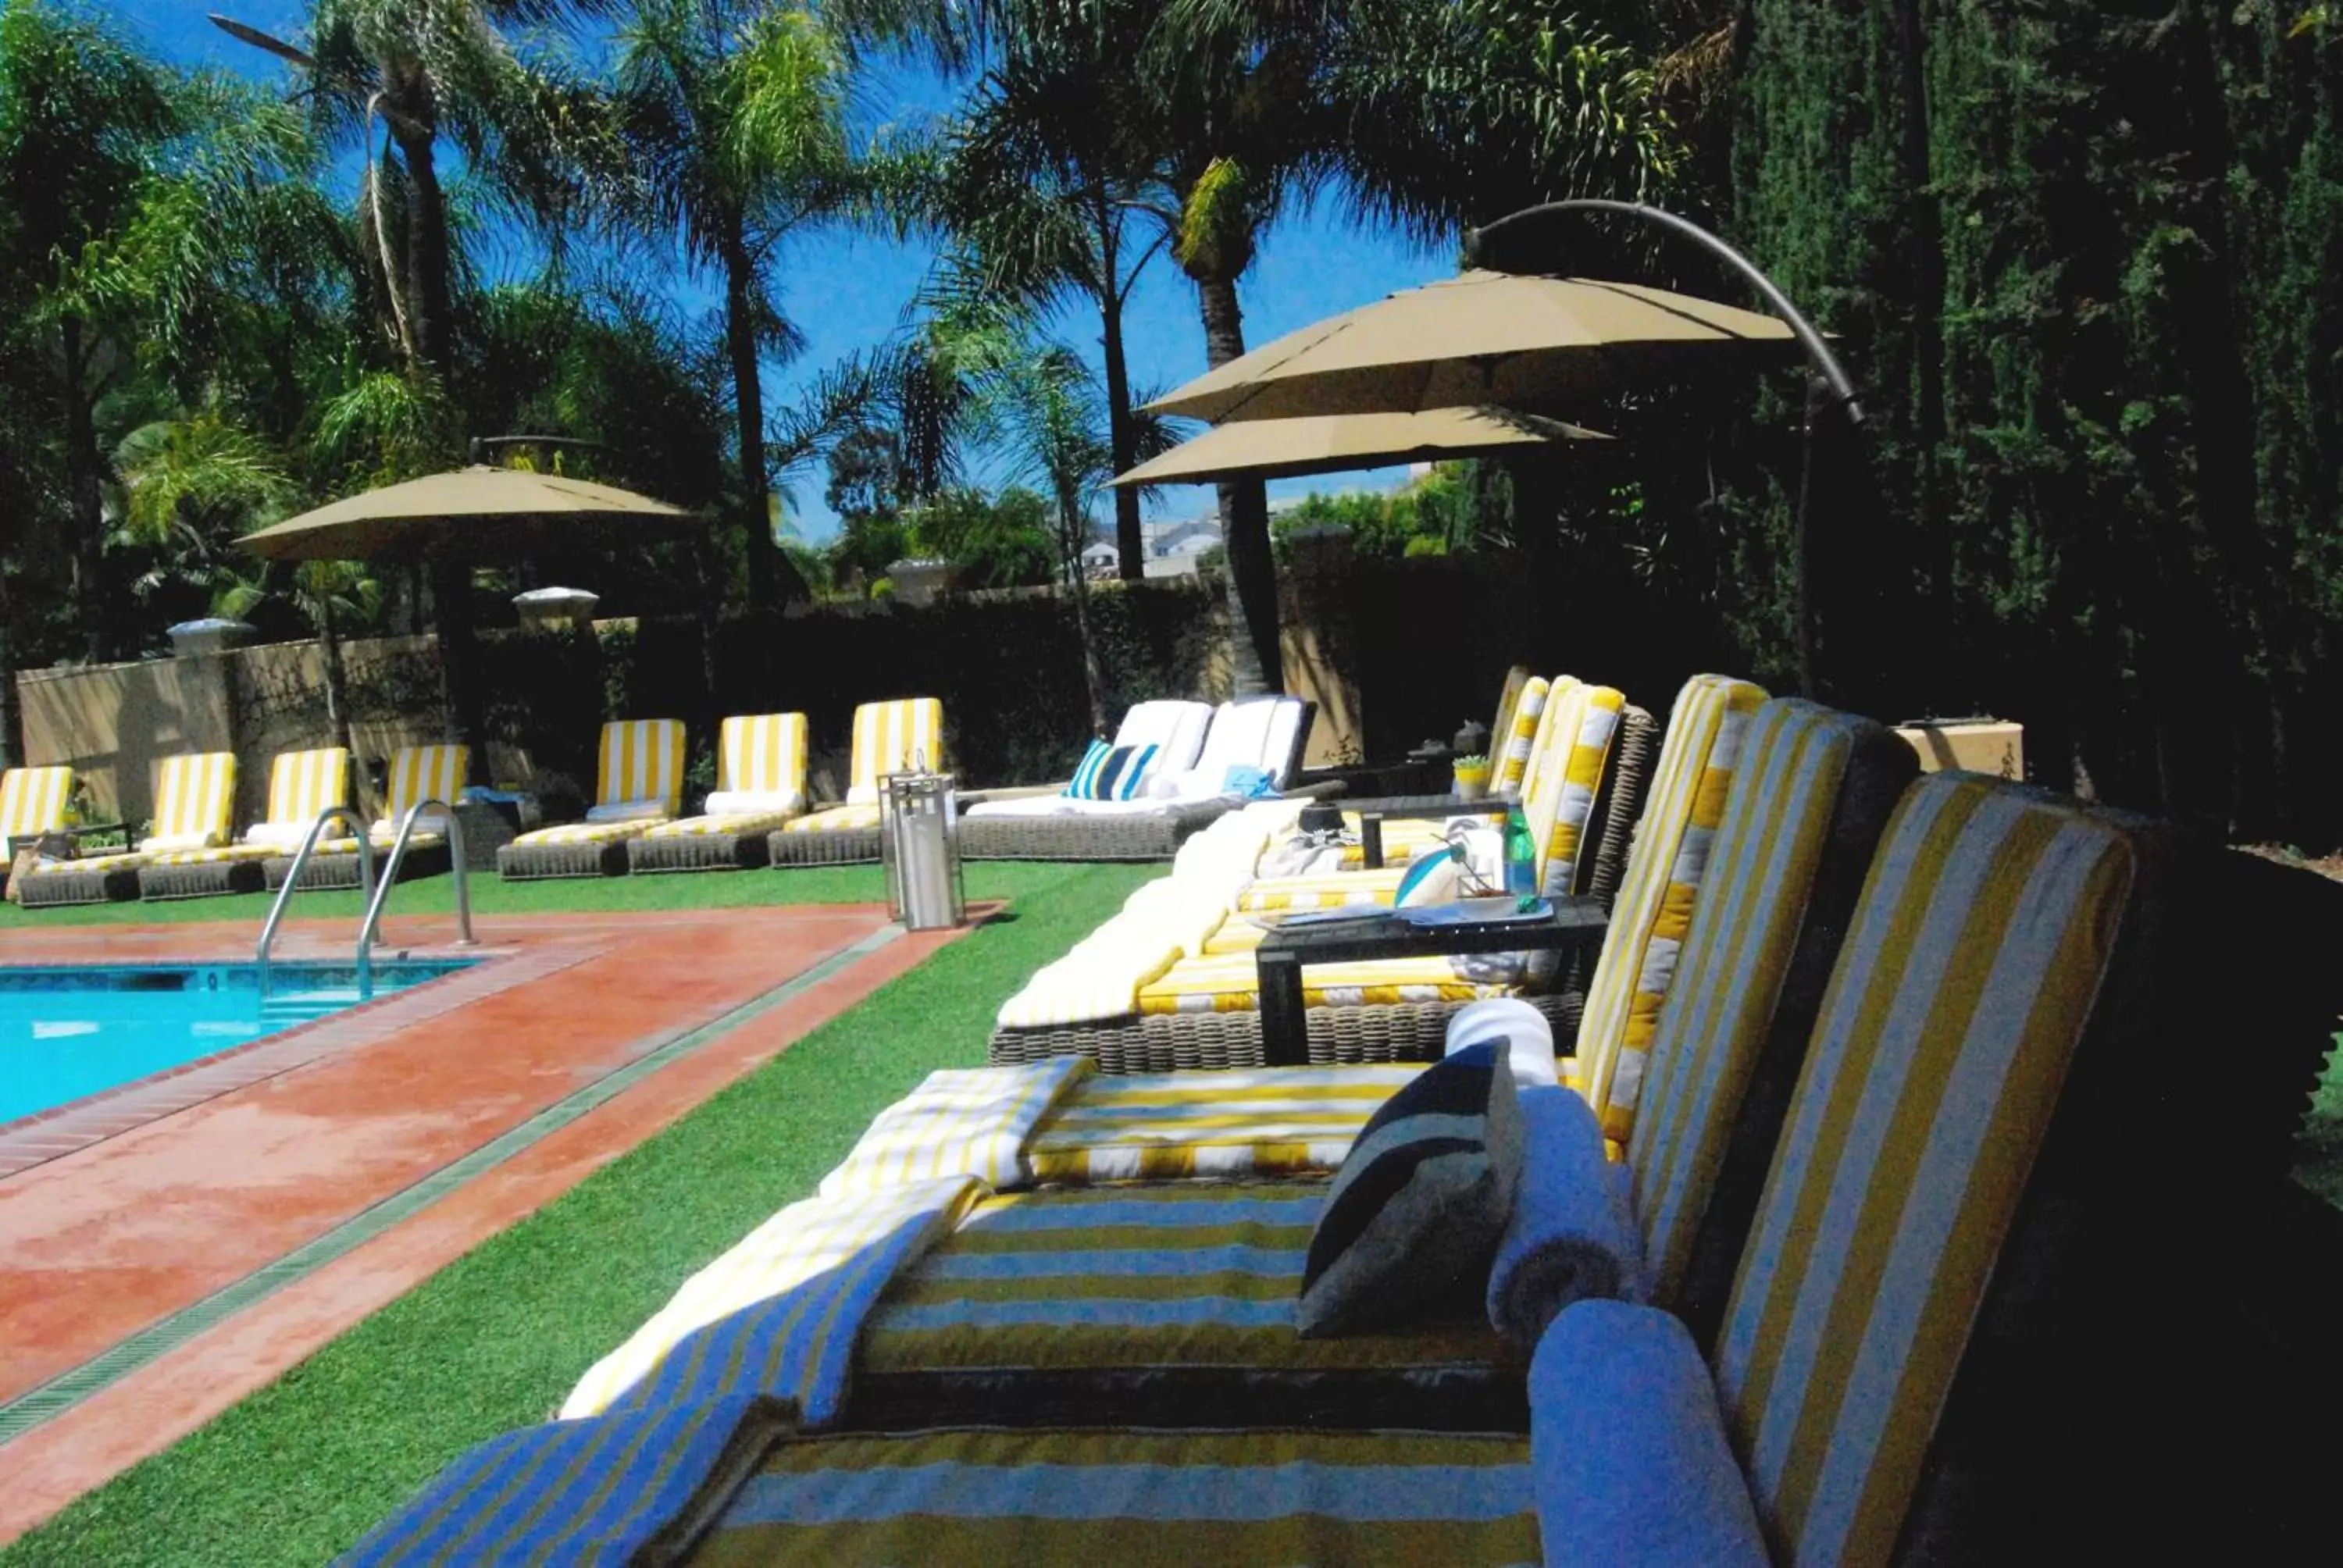 Garden, Patio/Outdoor Area in Hollywood Hotel - The Hotel of Hollywood Near Universal Studios